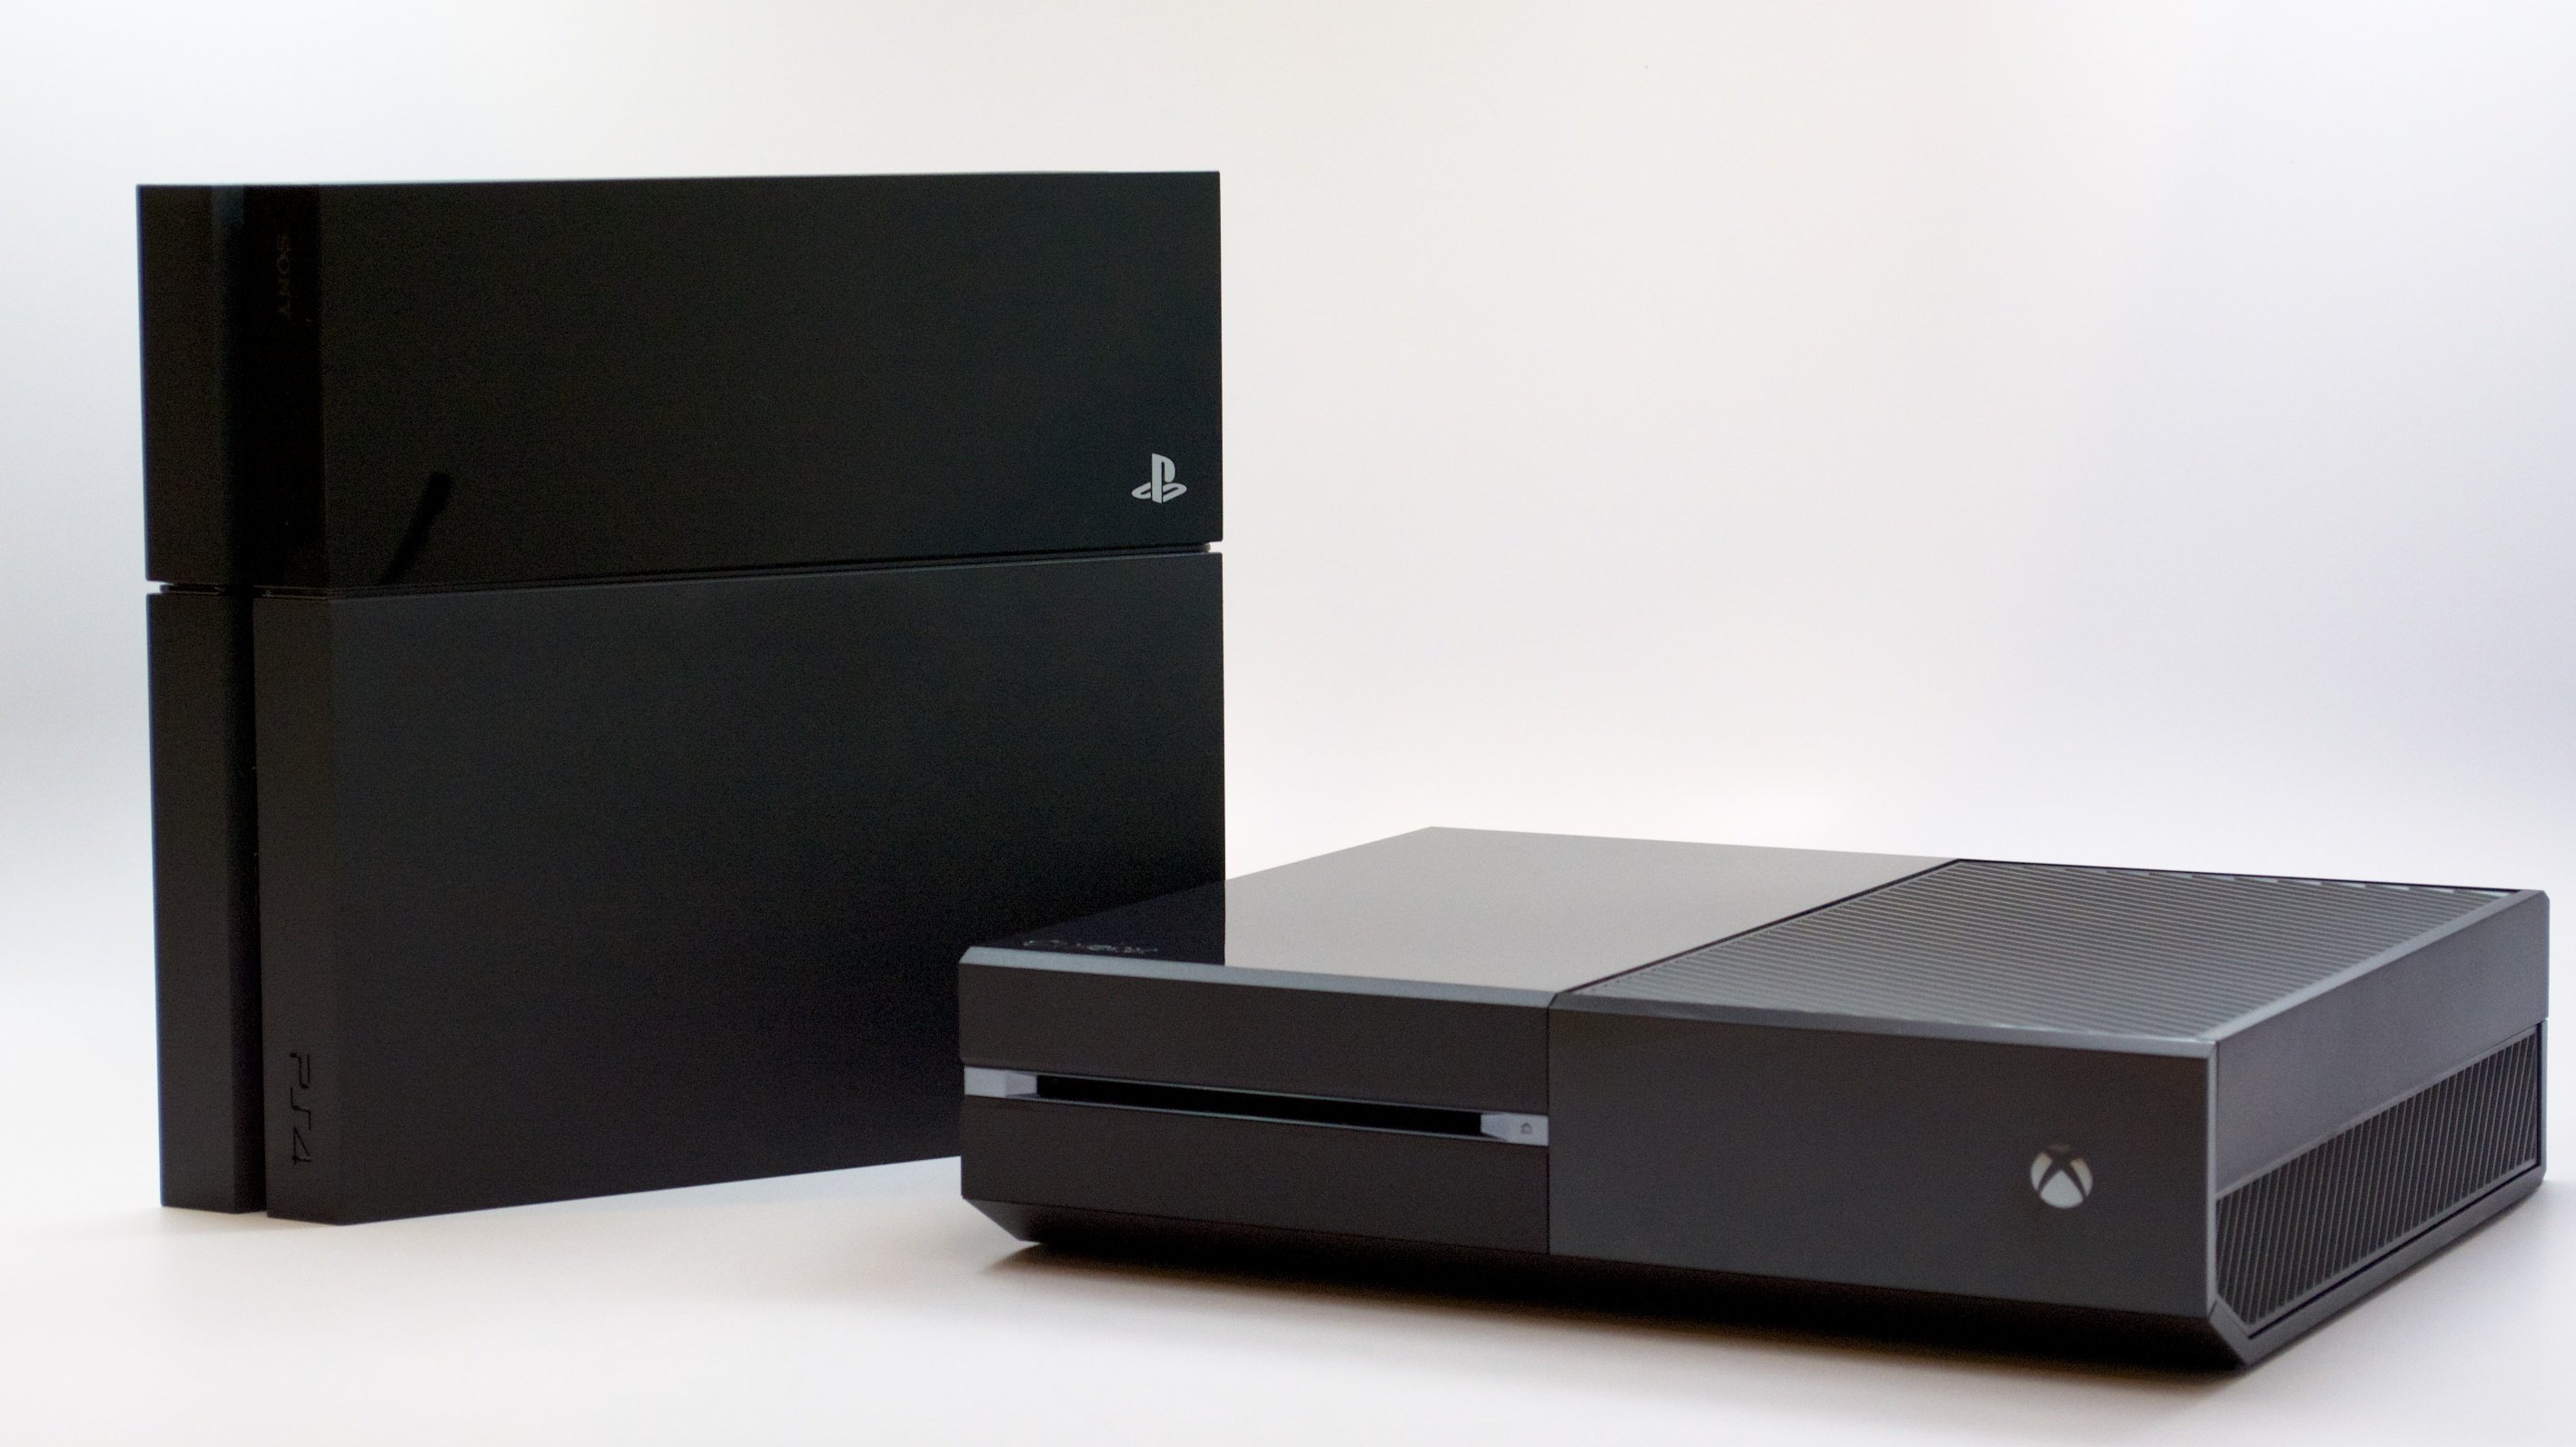 Comparing PS4 vs Xbox One? Here are seven things buyers need to know.